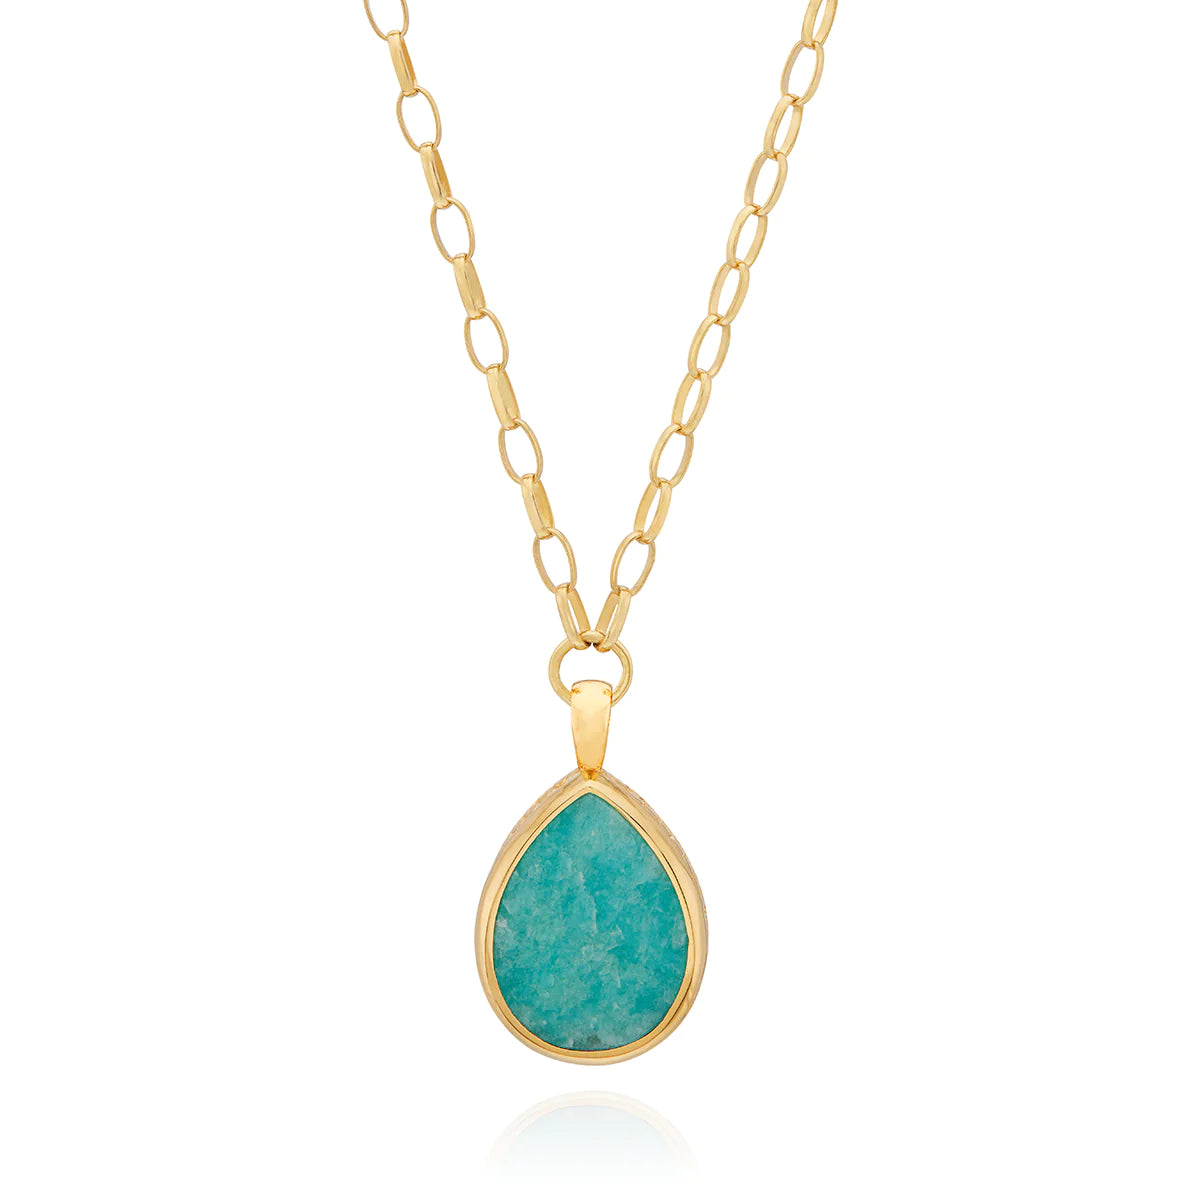 Large amazonite teardrop pendant necklace on gold chain